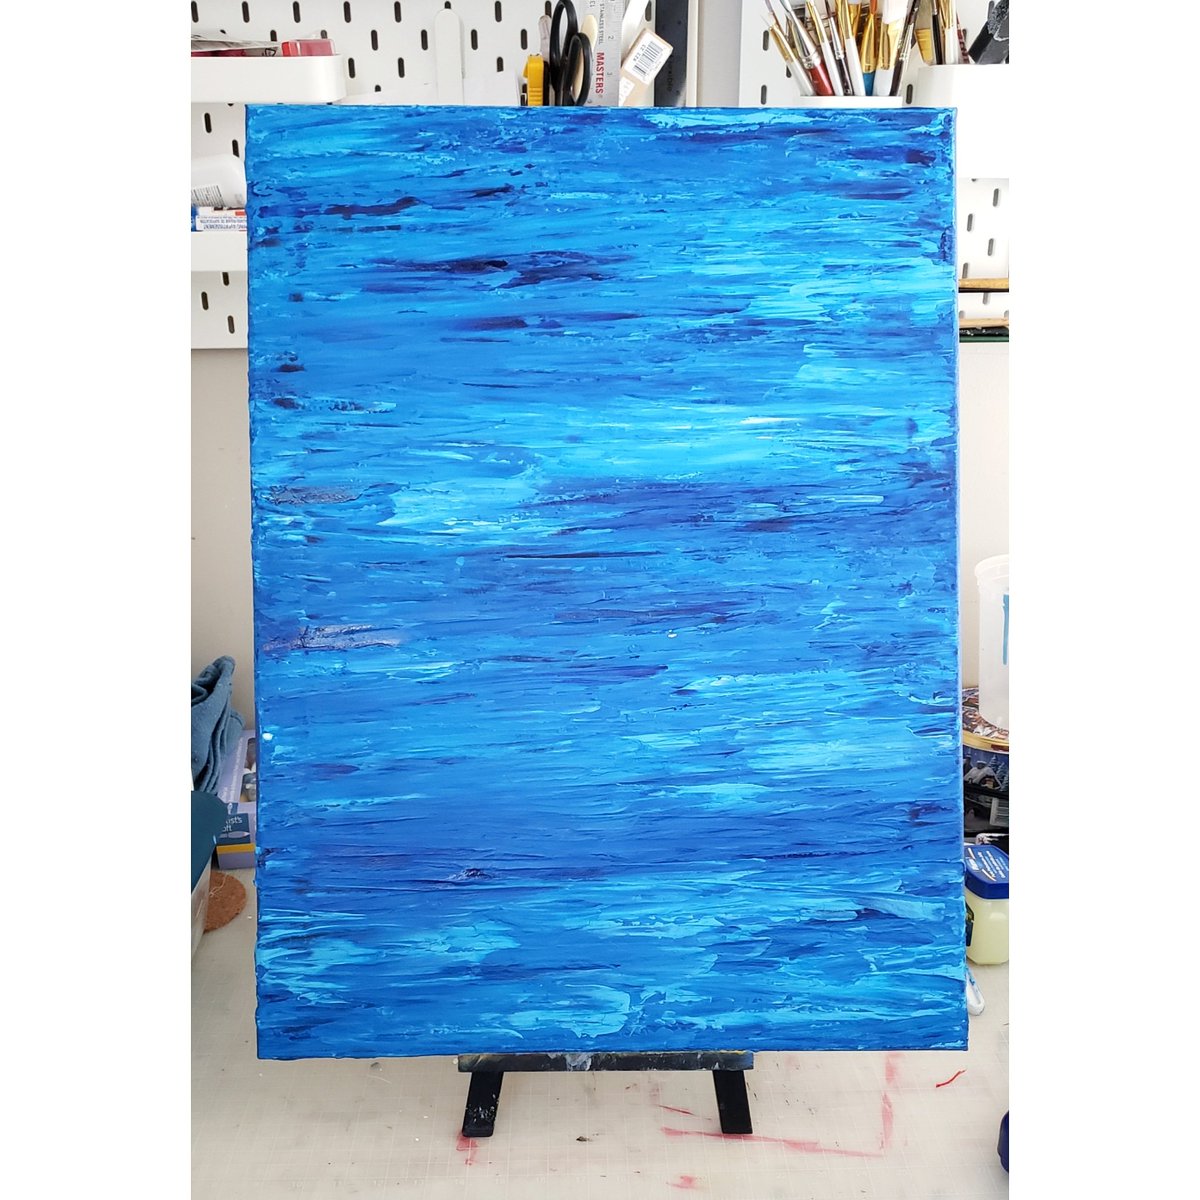 Trying to expand as an artist, and took a stab at a pallet knife painting last night. Was liking the way it was looking like water, so I kept to blues and the one direction across the canvas.

#painting #canvas #palletknifepainting #abstract #acrylicpainting